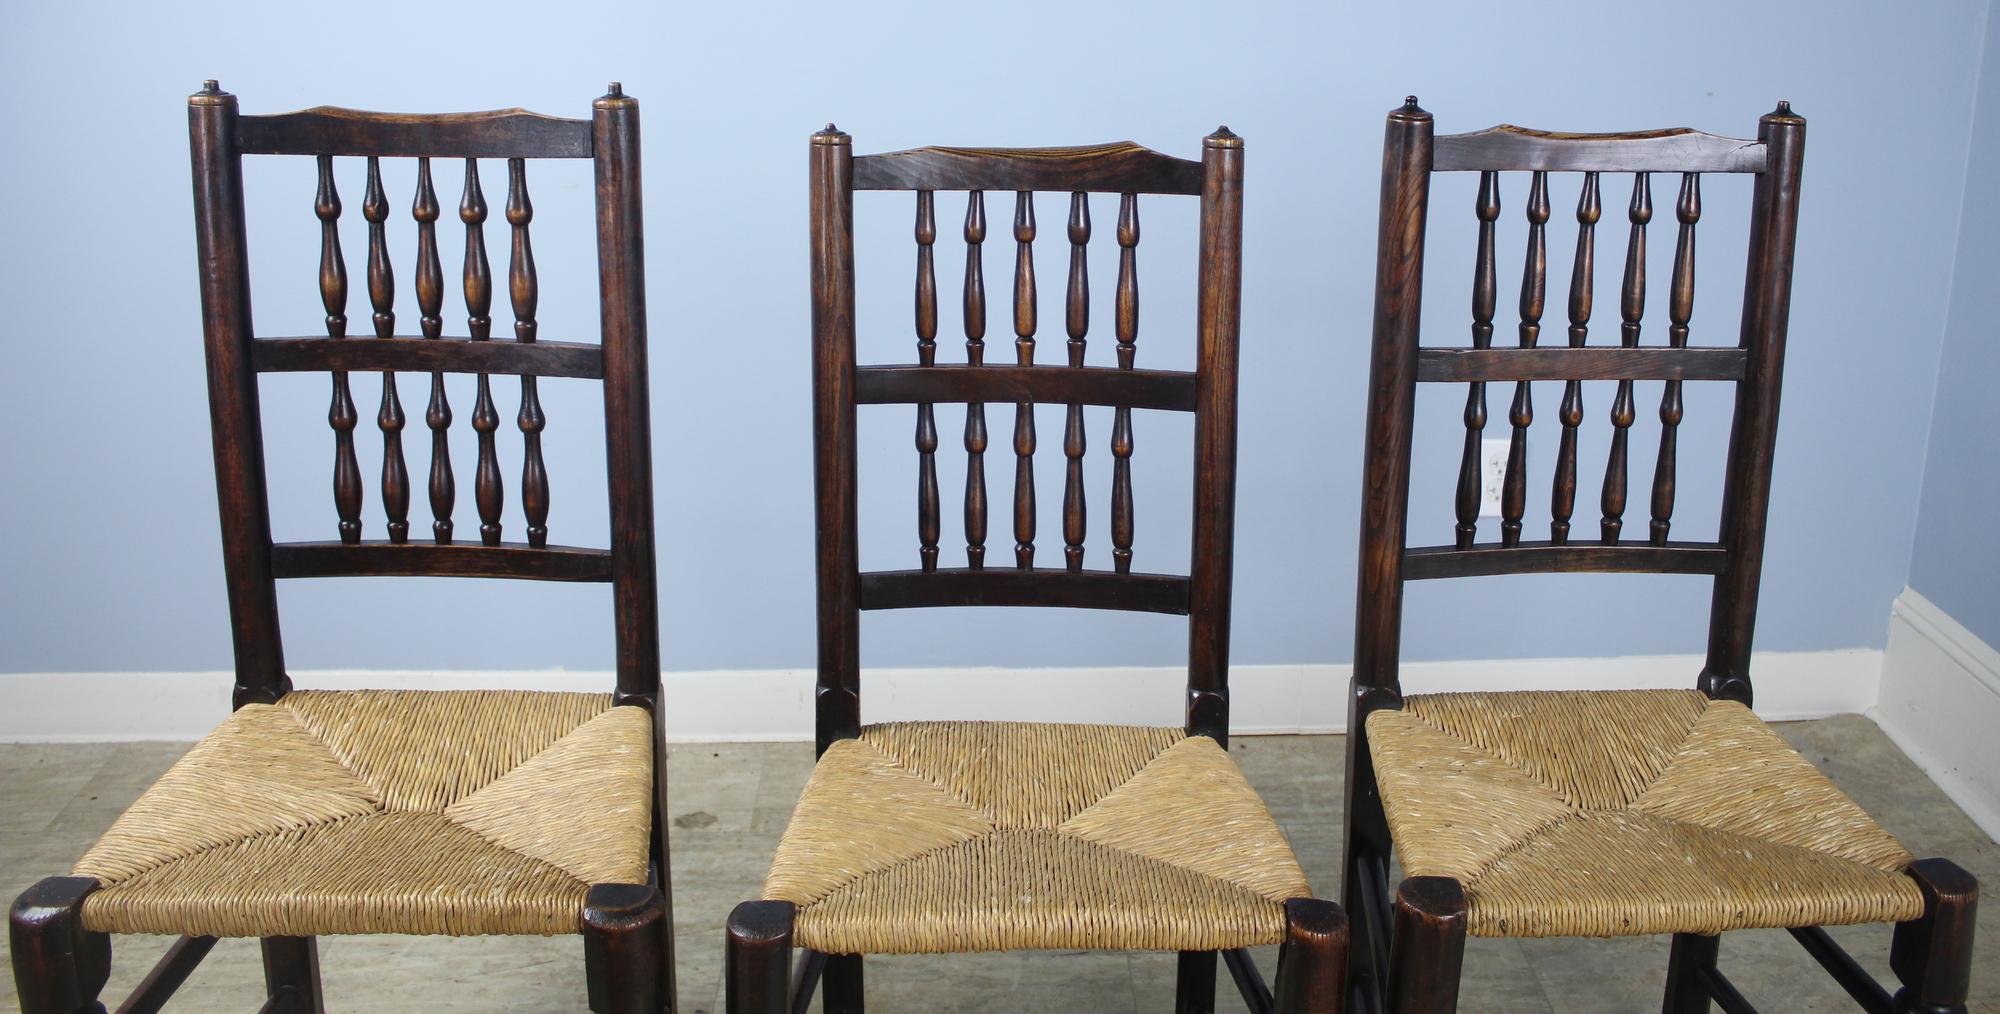 A collection of 8 country spindleback chairs, with nice color and patina. They are very much handmade and are possibly a marriage of two different sets from the same maker. The back heights, seat heights, widths and depths are similar but not